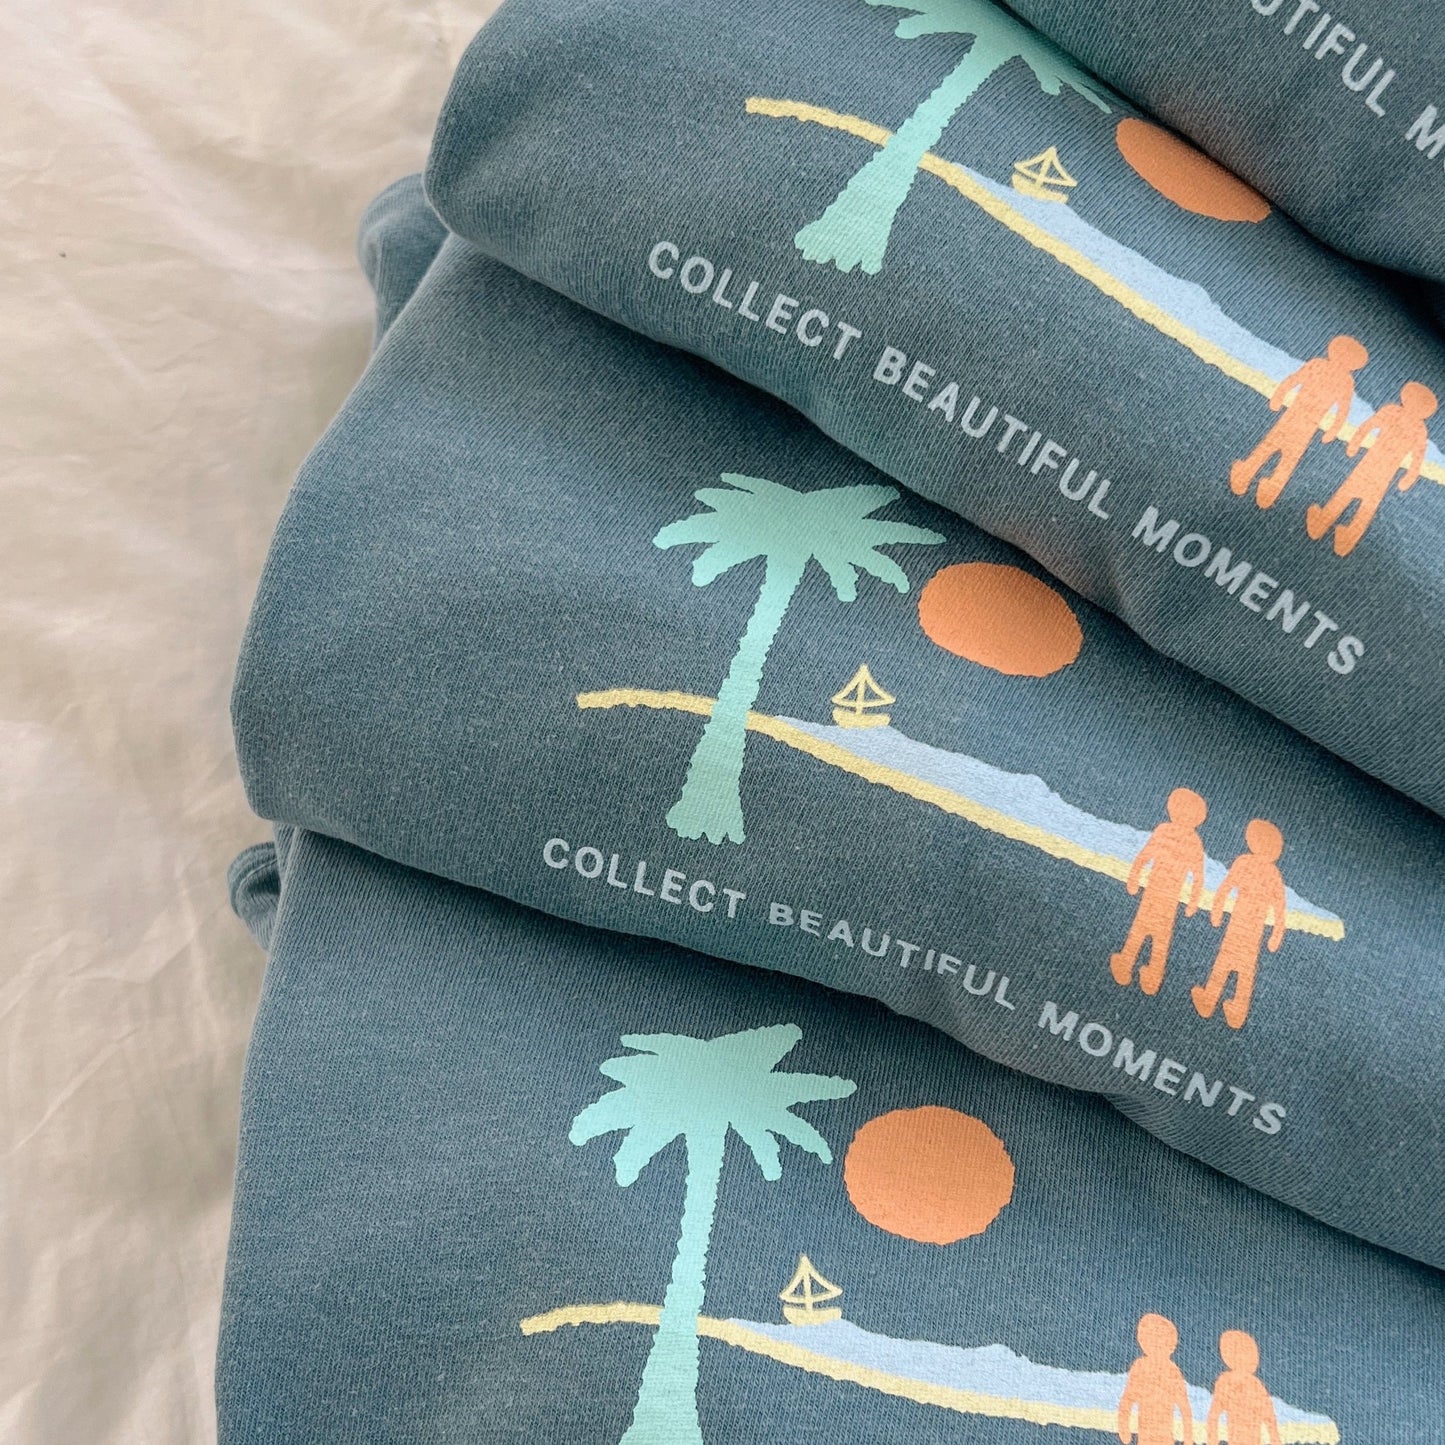 Collect Beautiful Moments Tee